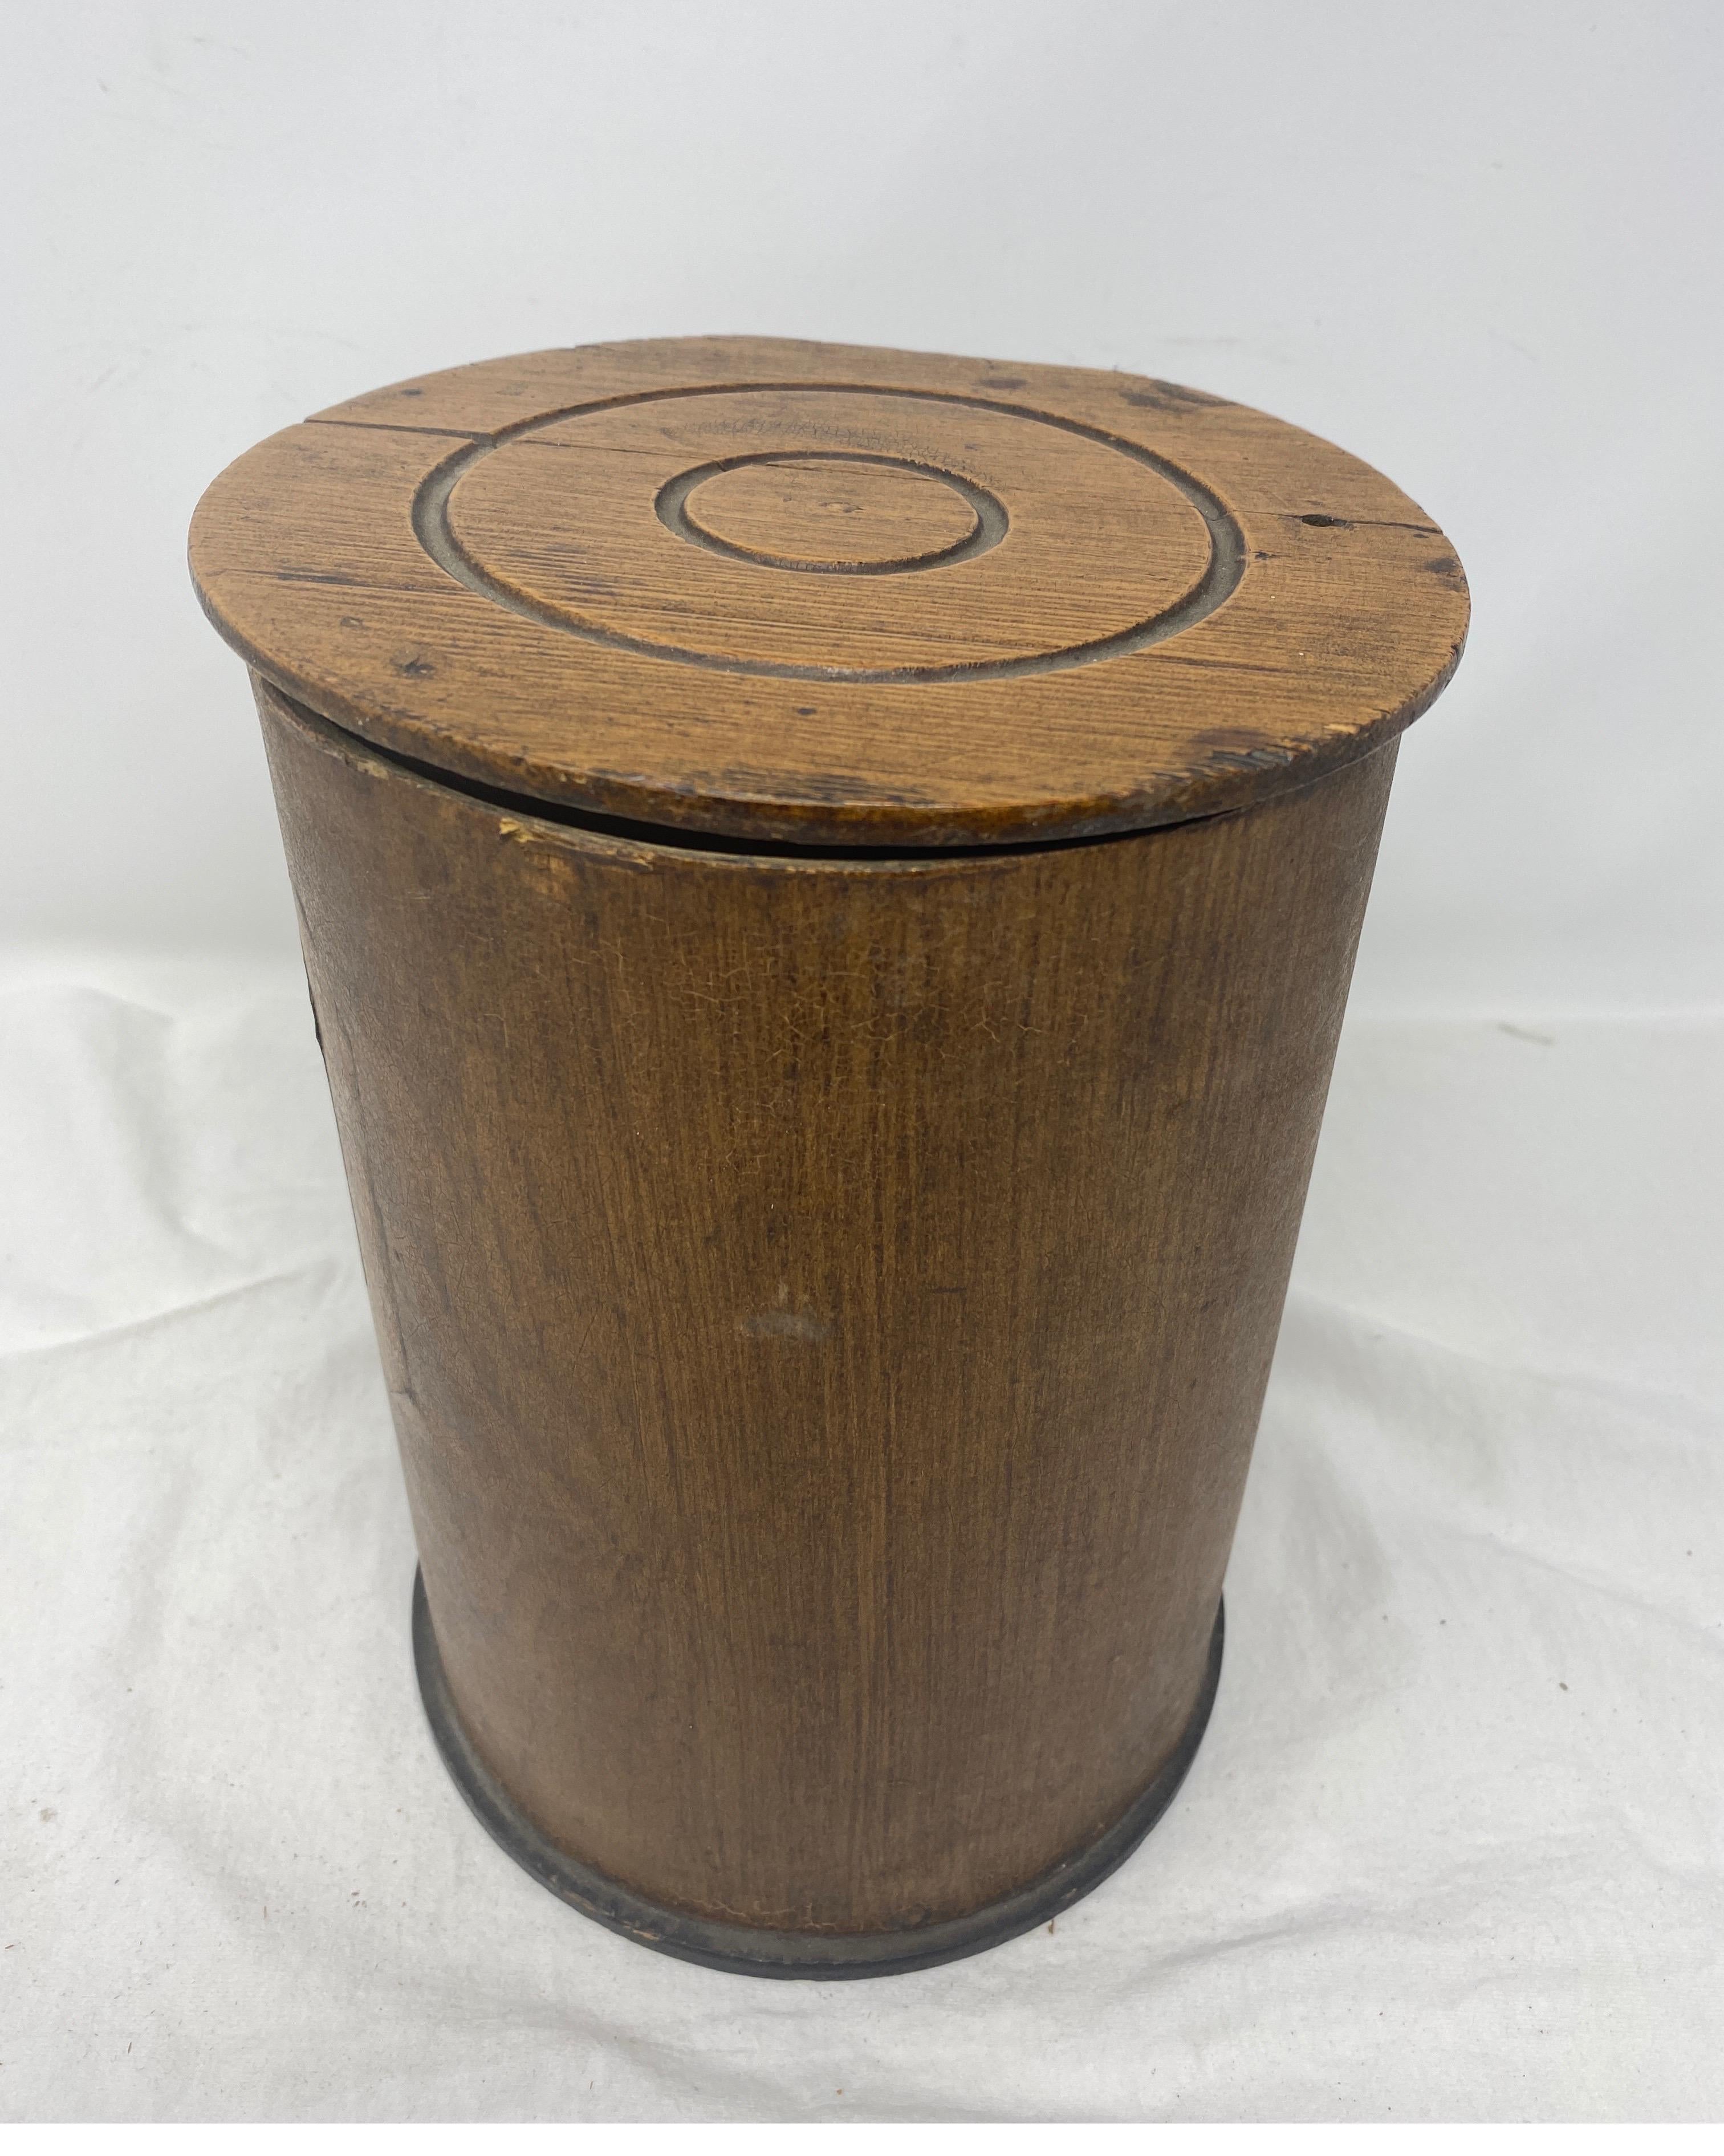 Antique wooden apothecary pharmacy storage jar with lid. A large 9 inch wood and fiberboard apothecary jar or canister. With Souchoiig, a fine variety of black tea is written on a paper label. l. The top and bottom are made of wood, and the sides